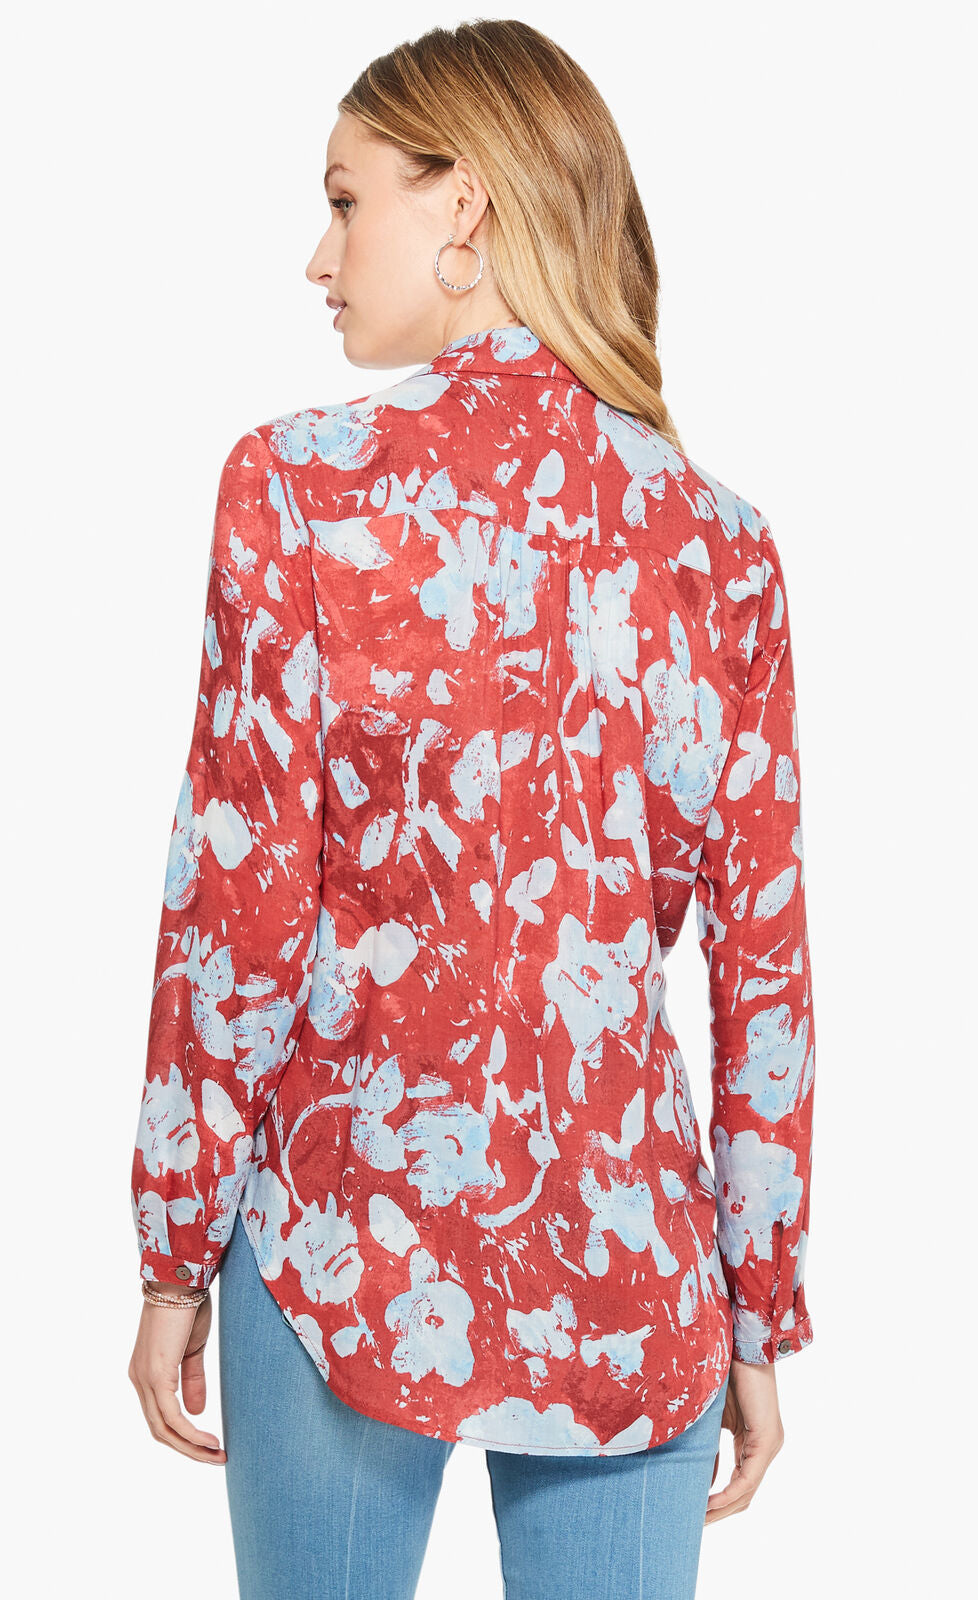 Back top half view of a woman wearing the terracotta blooms shirt from nic and zoe. This shirt has a relaxed fit with long sleeves. The shirt is red with a light blue floral print.